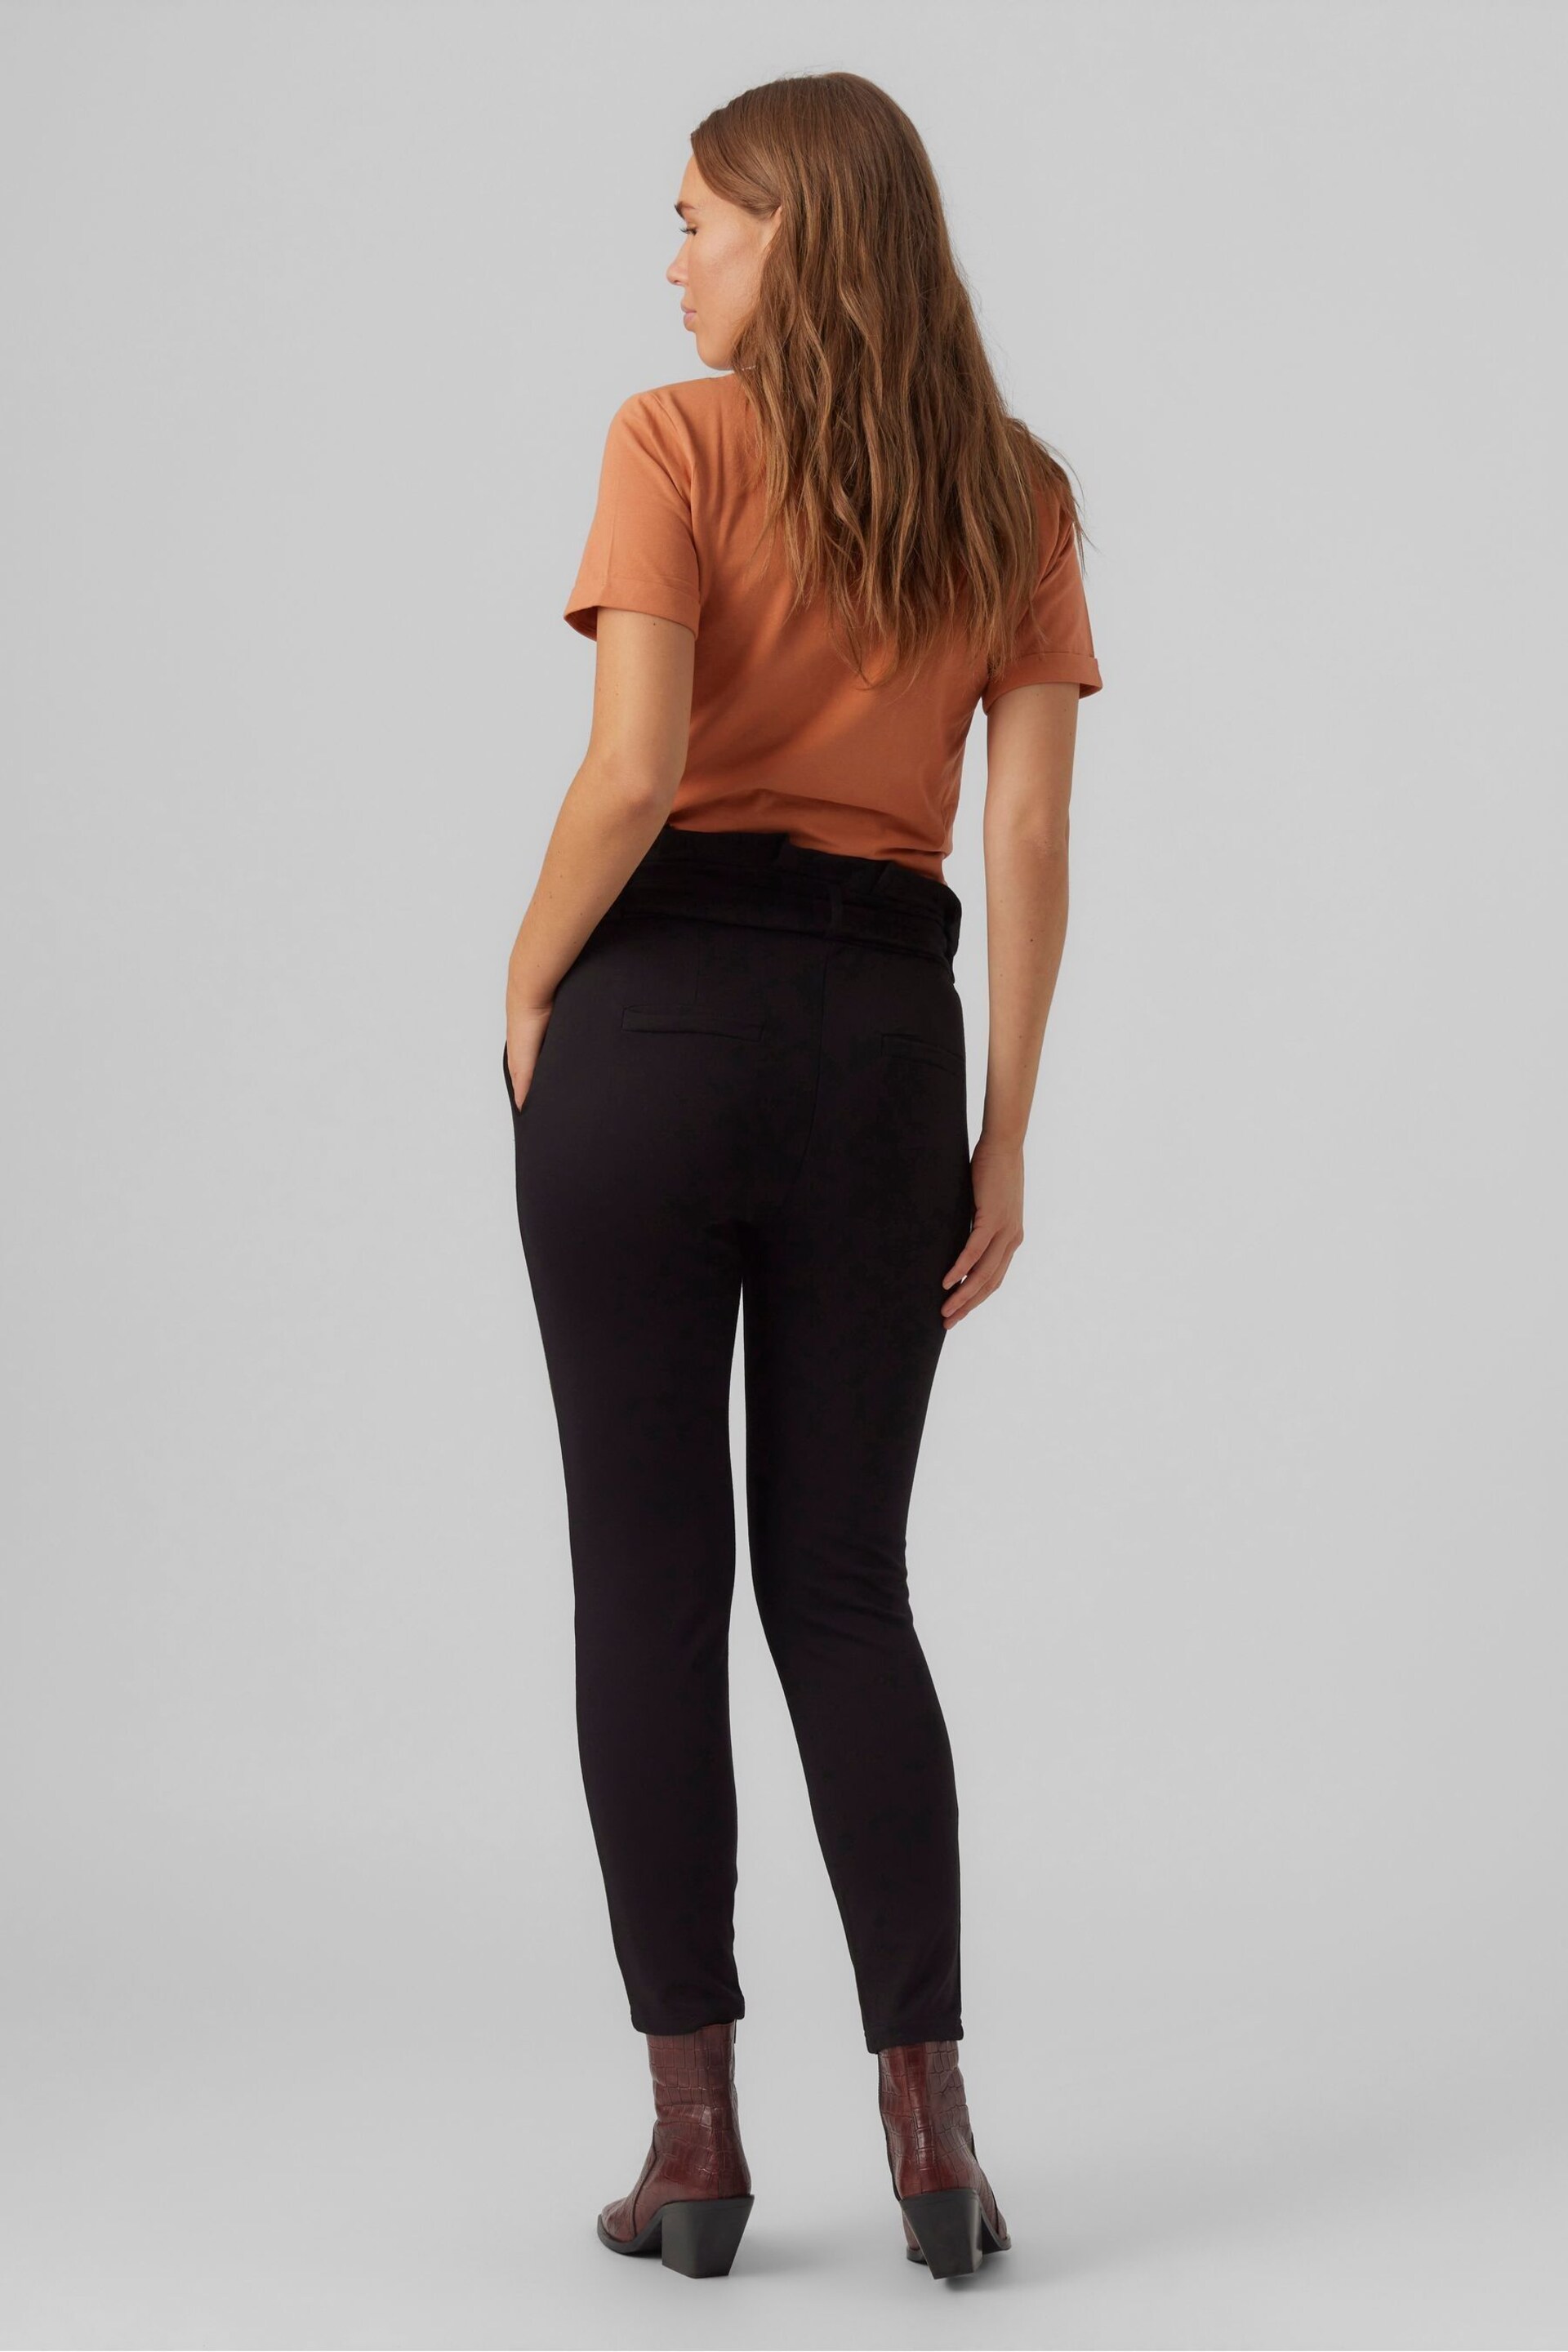 VERO MODA Black Maternity Over The Bump Paperbag Waist Stretch Trousers - Image 2 of 5